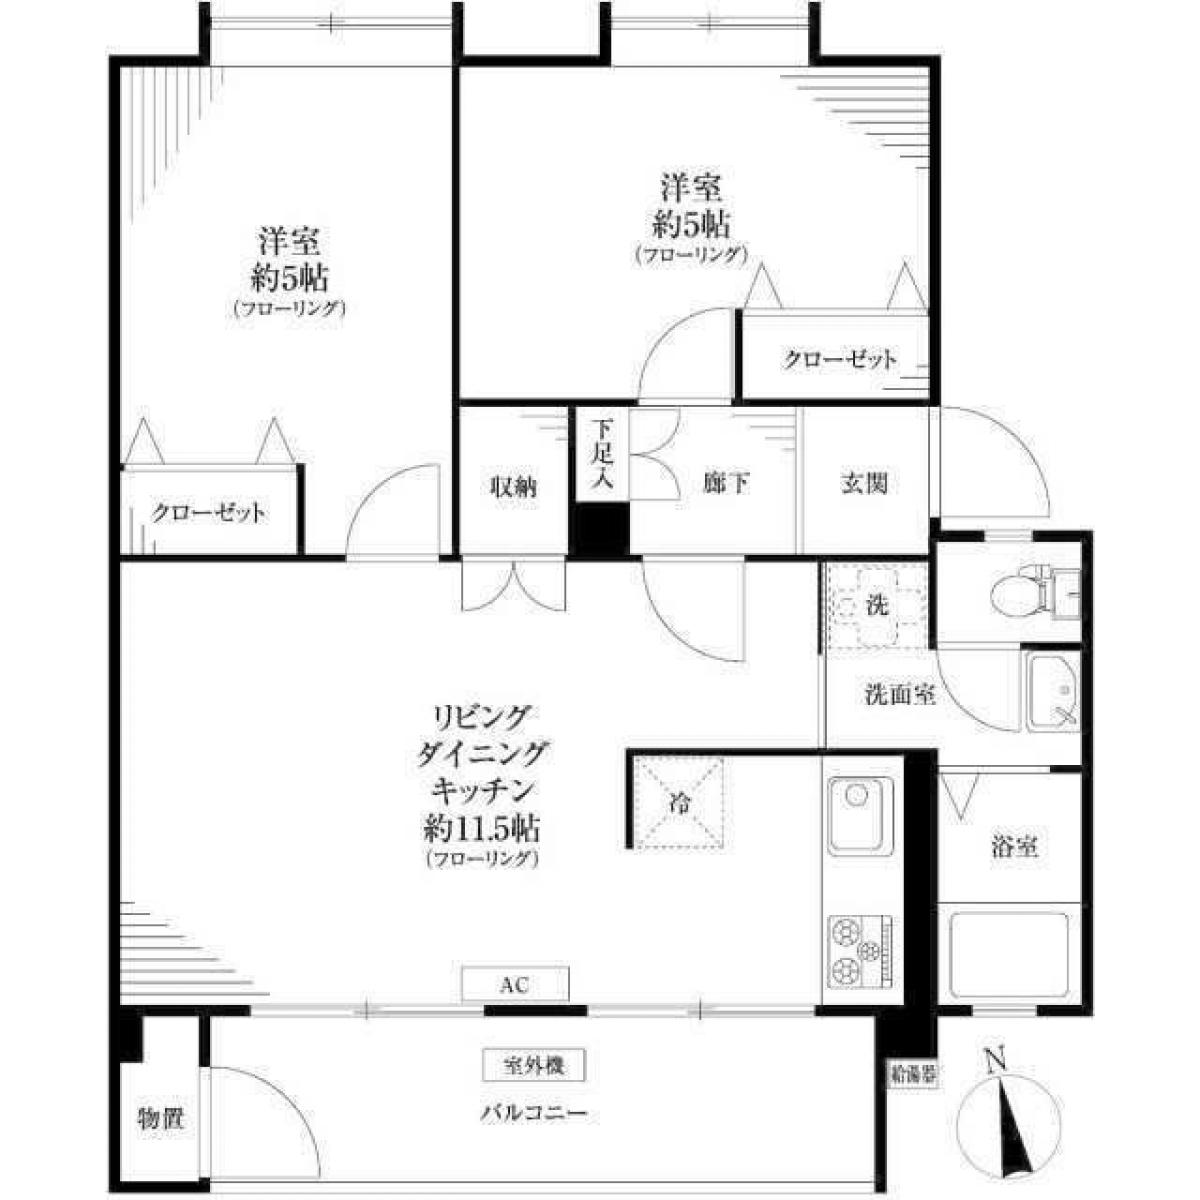 Picture of Apartment For Sale in Komae Shi, Tokyo, Japan